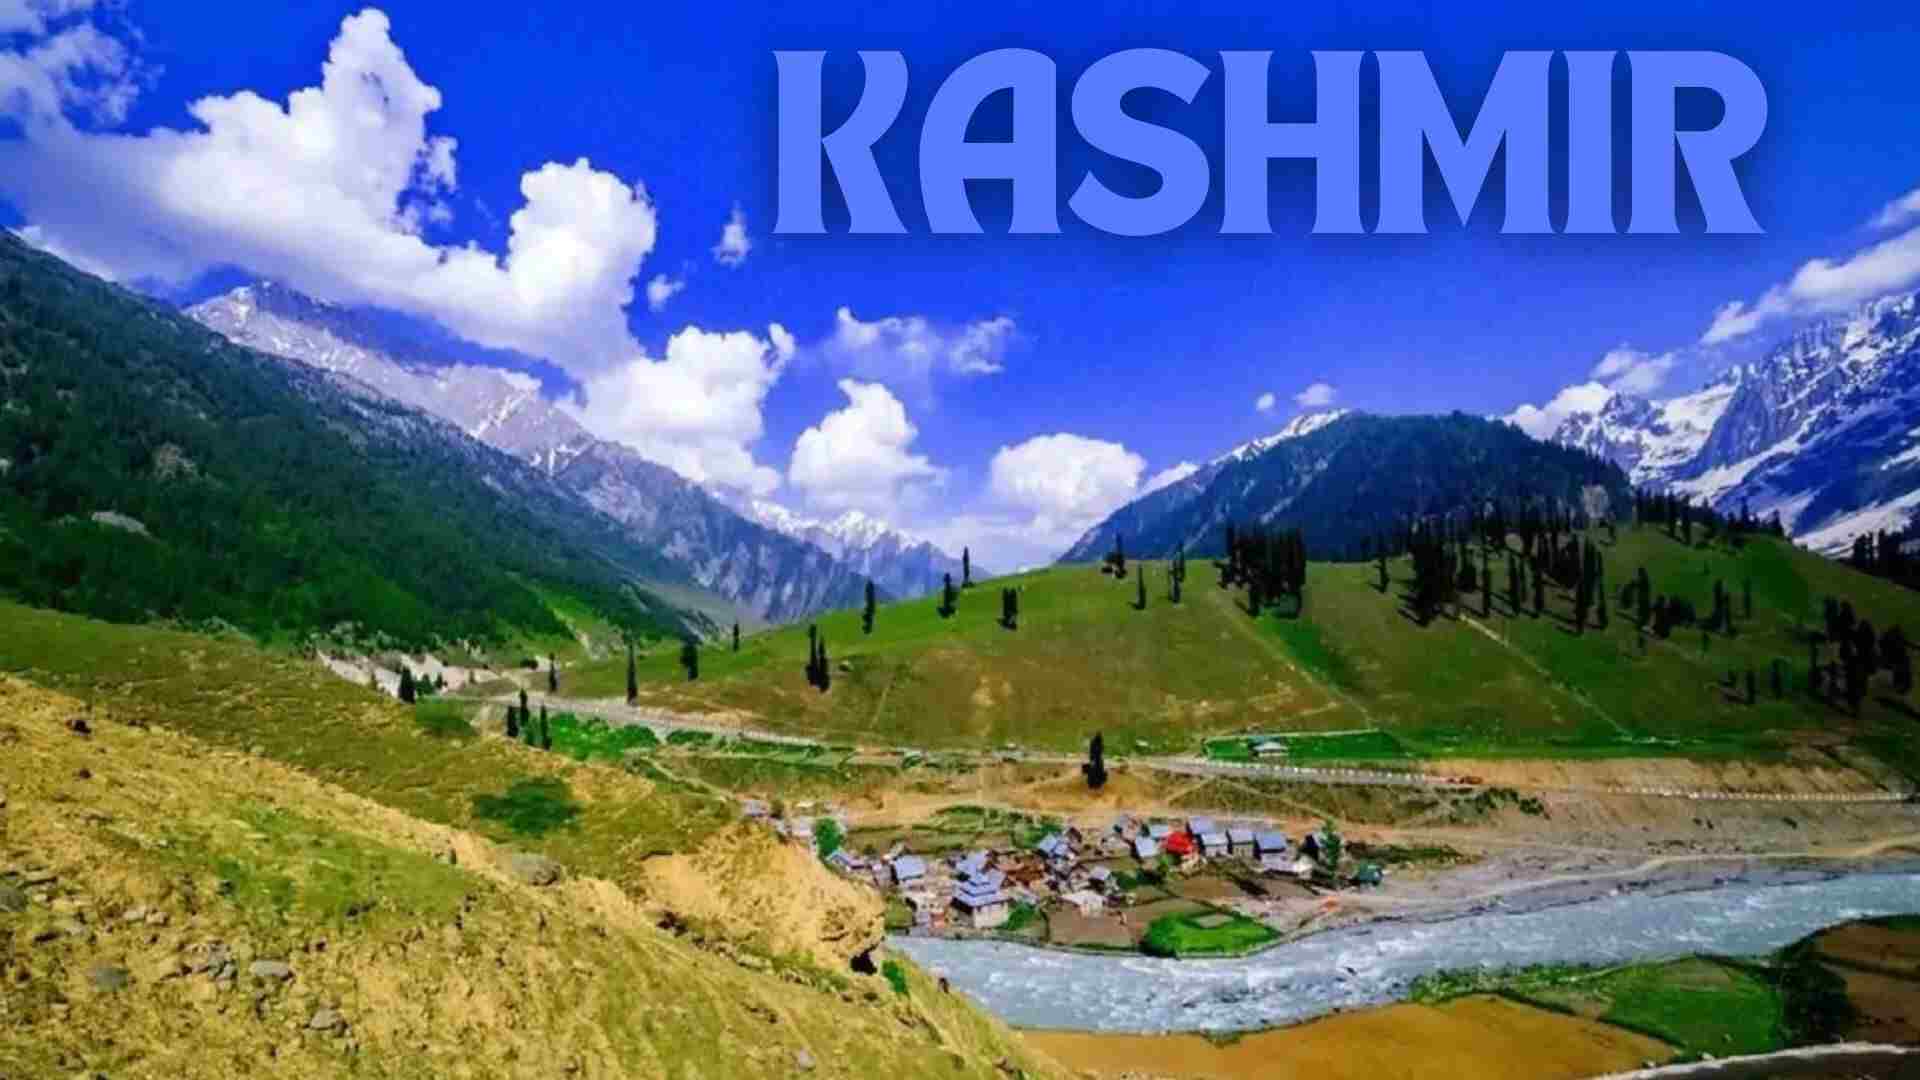 PoK's Discontent And J&K's Development: Two Faces of Kashmir